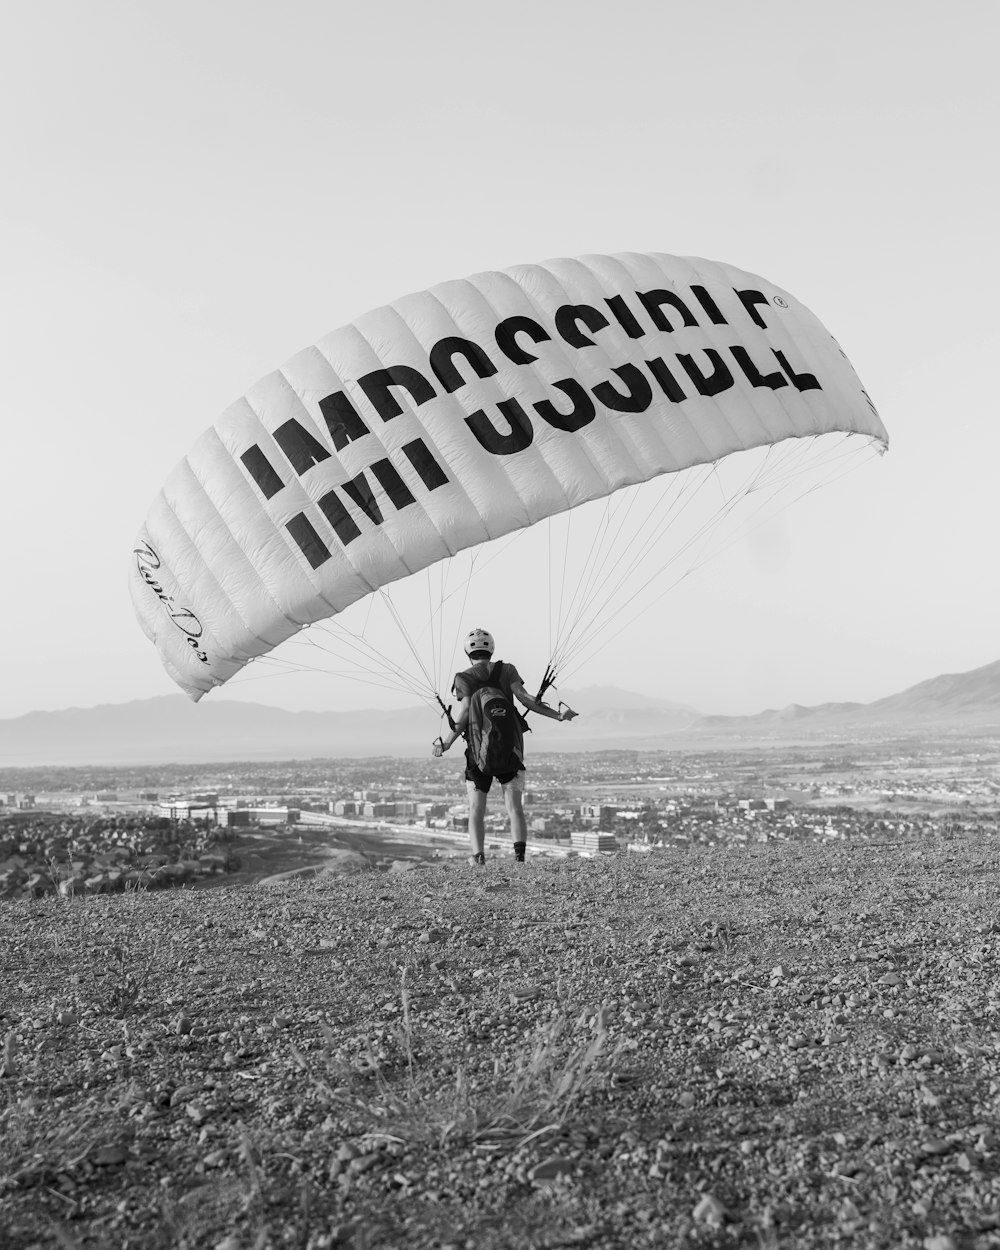 grayscale photo of man in black shirt and pants holding parachute